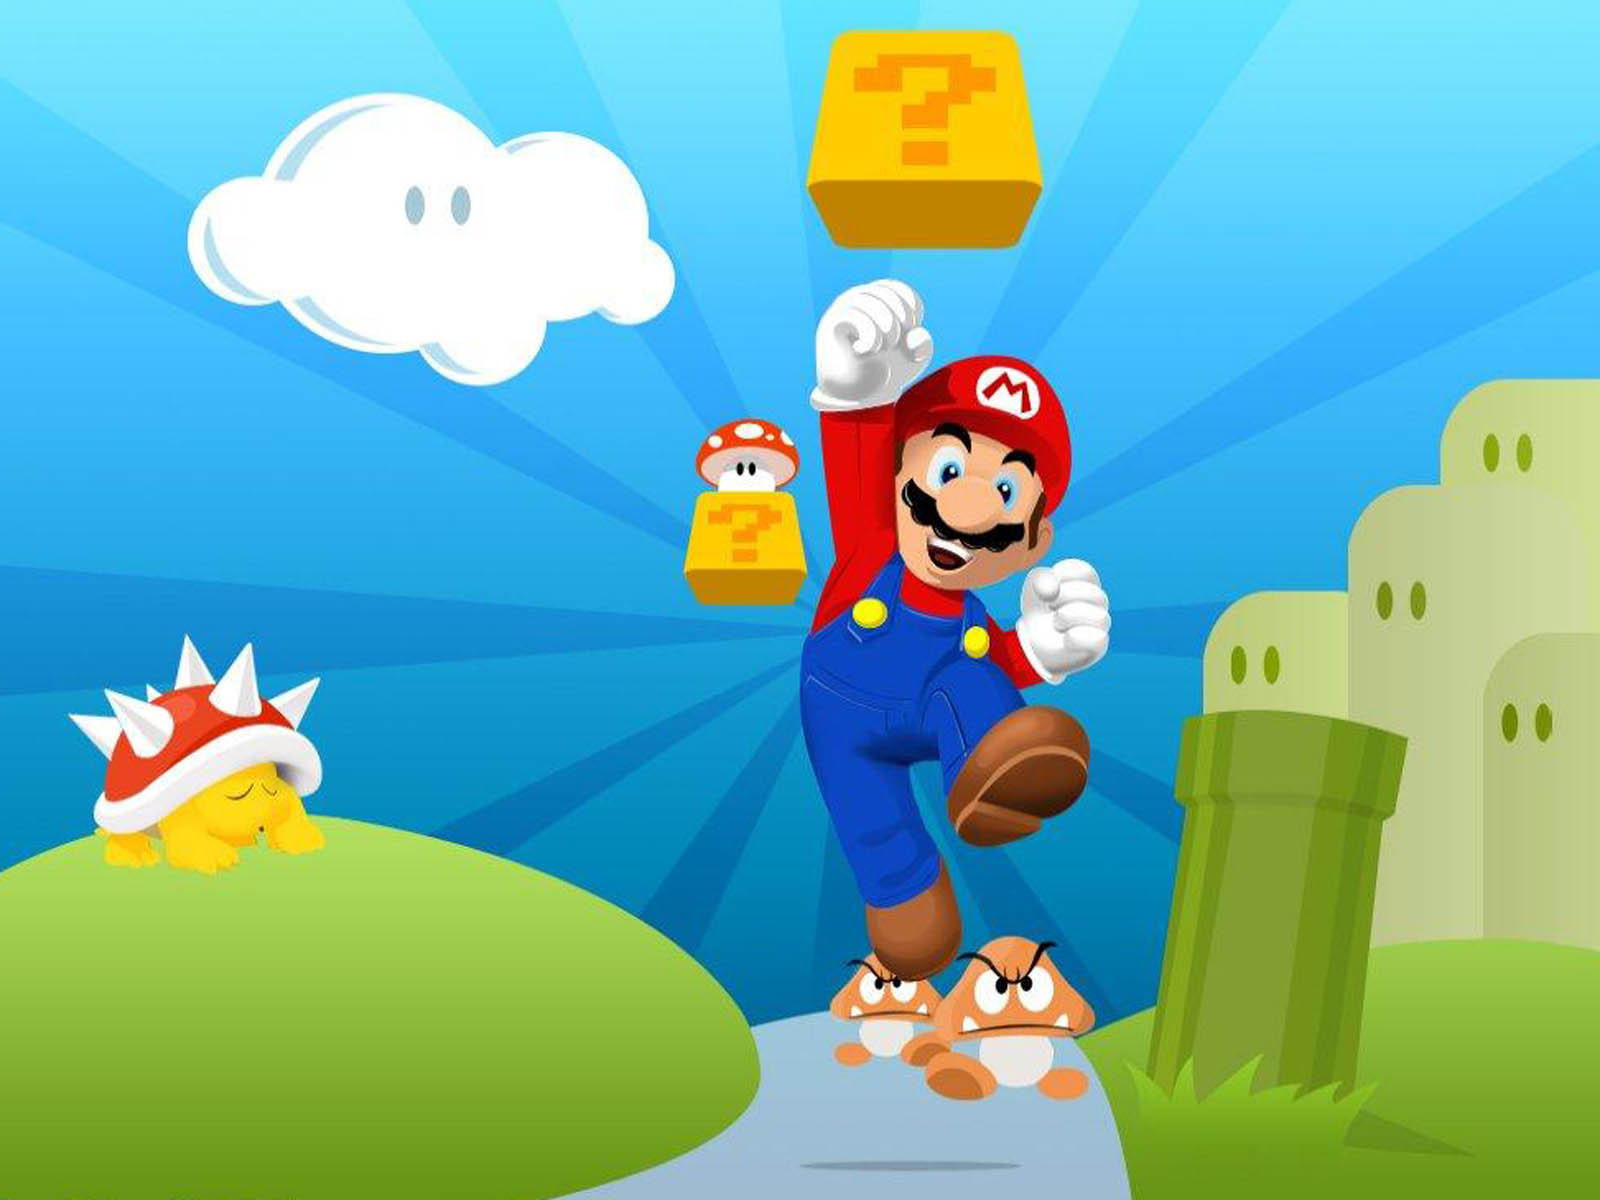 Mario Wallpaper Image Photos Pictures And Background For